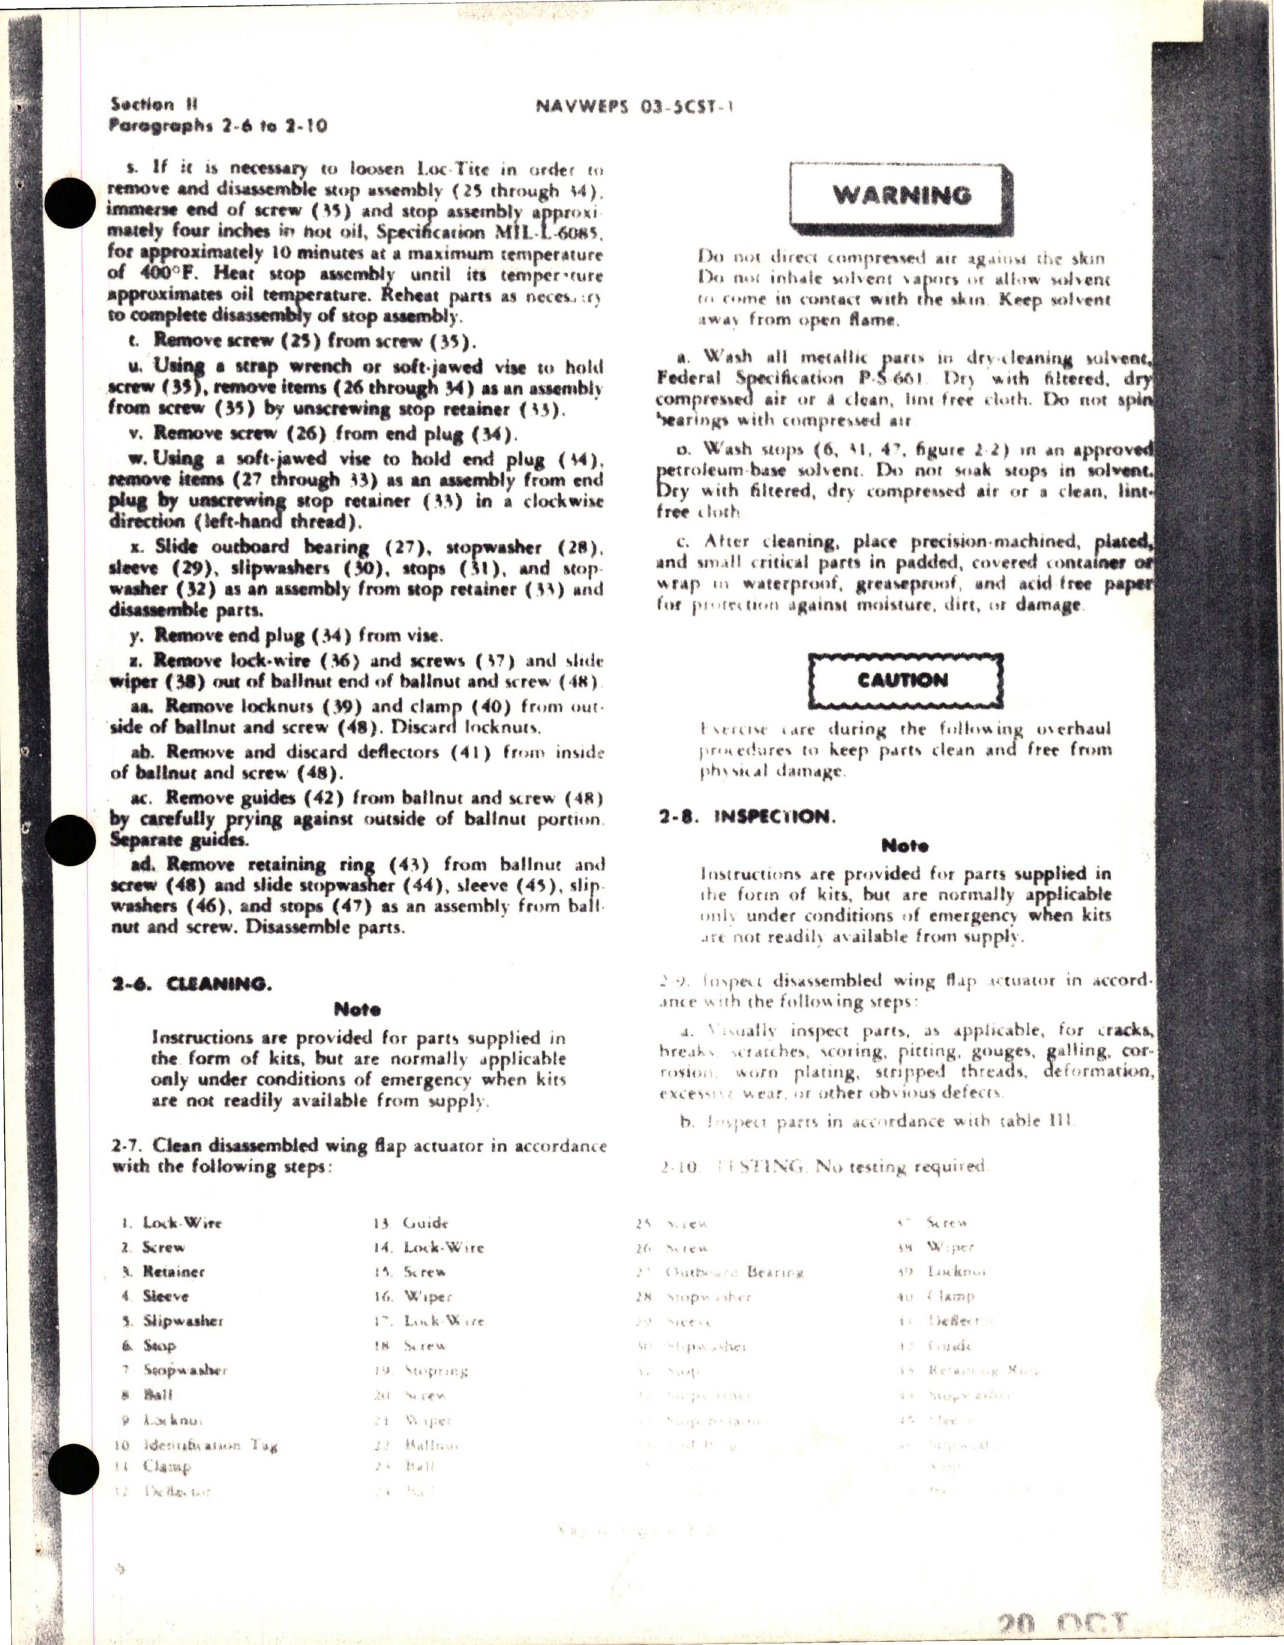 Sample page 9 from AirCorps Library document: Maintenance Instructions for Wing Flap Actuator - Parts SPL5588-1 and SPL5568-3 